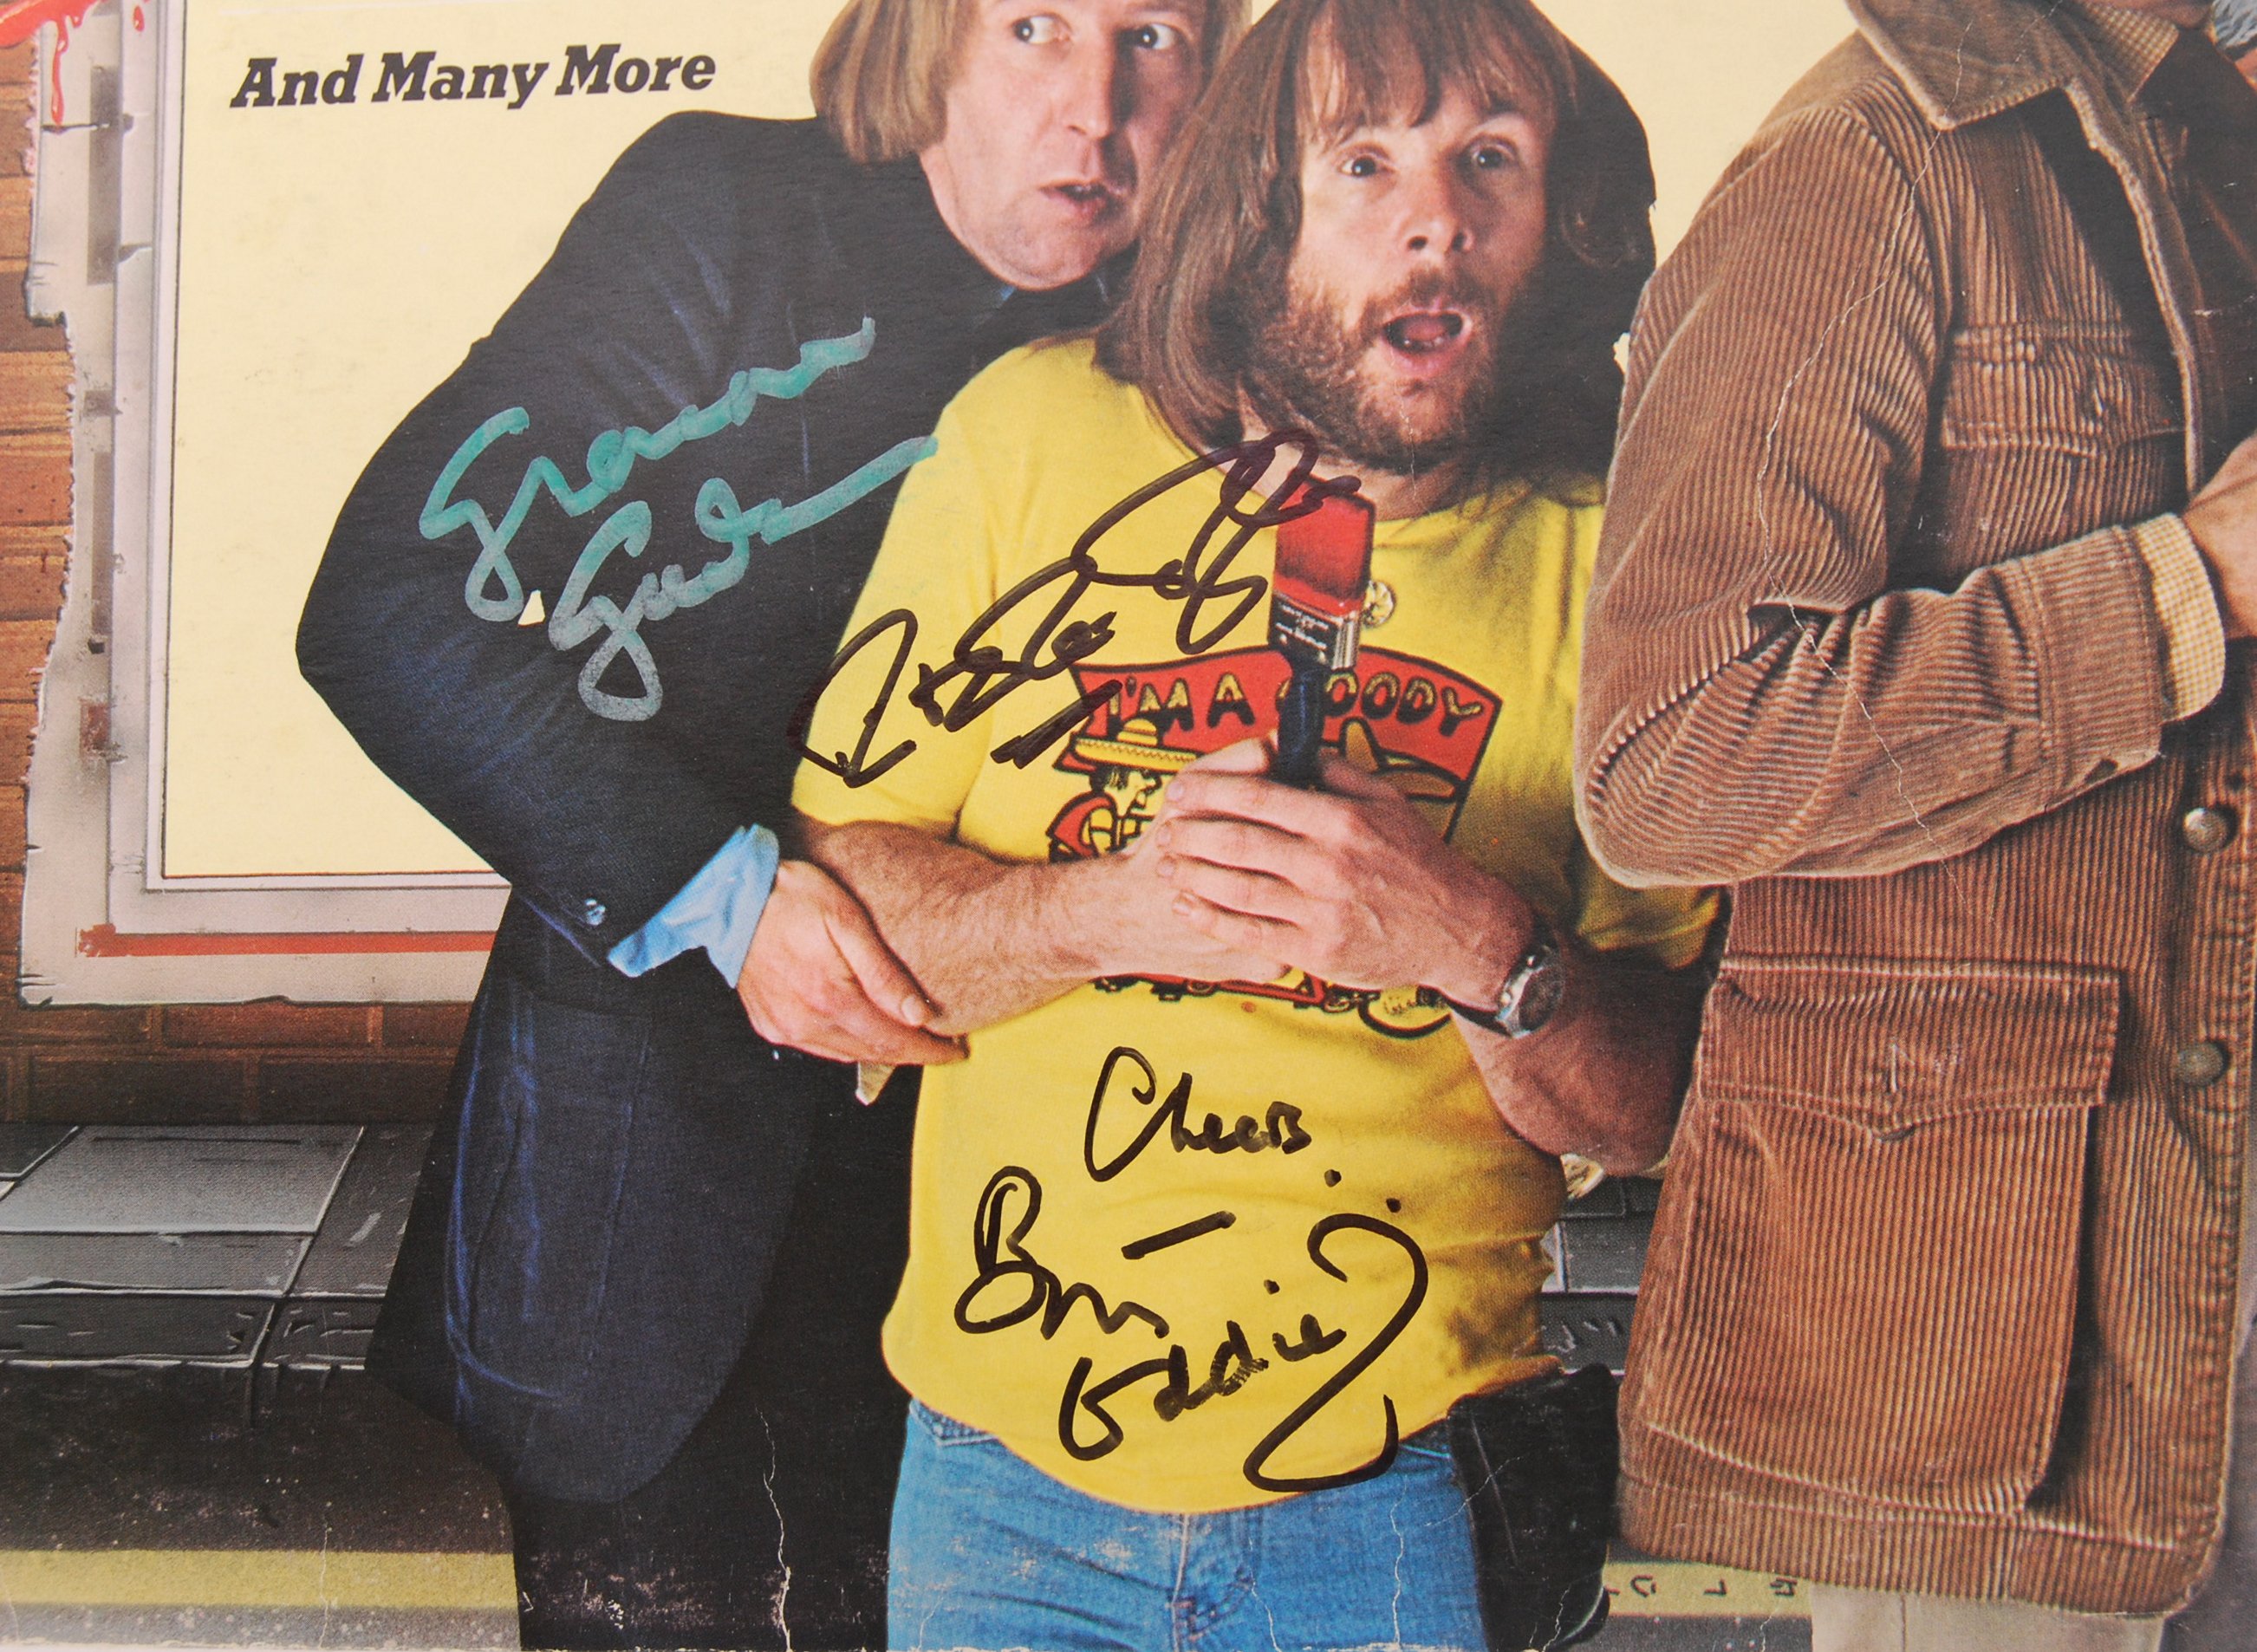 THE GOODIES - NOTHING TO DO WITH US - FULLY SIGNED - Image 2 of 3